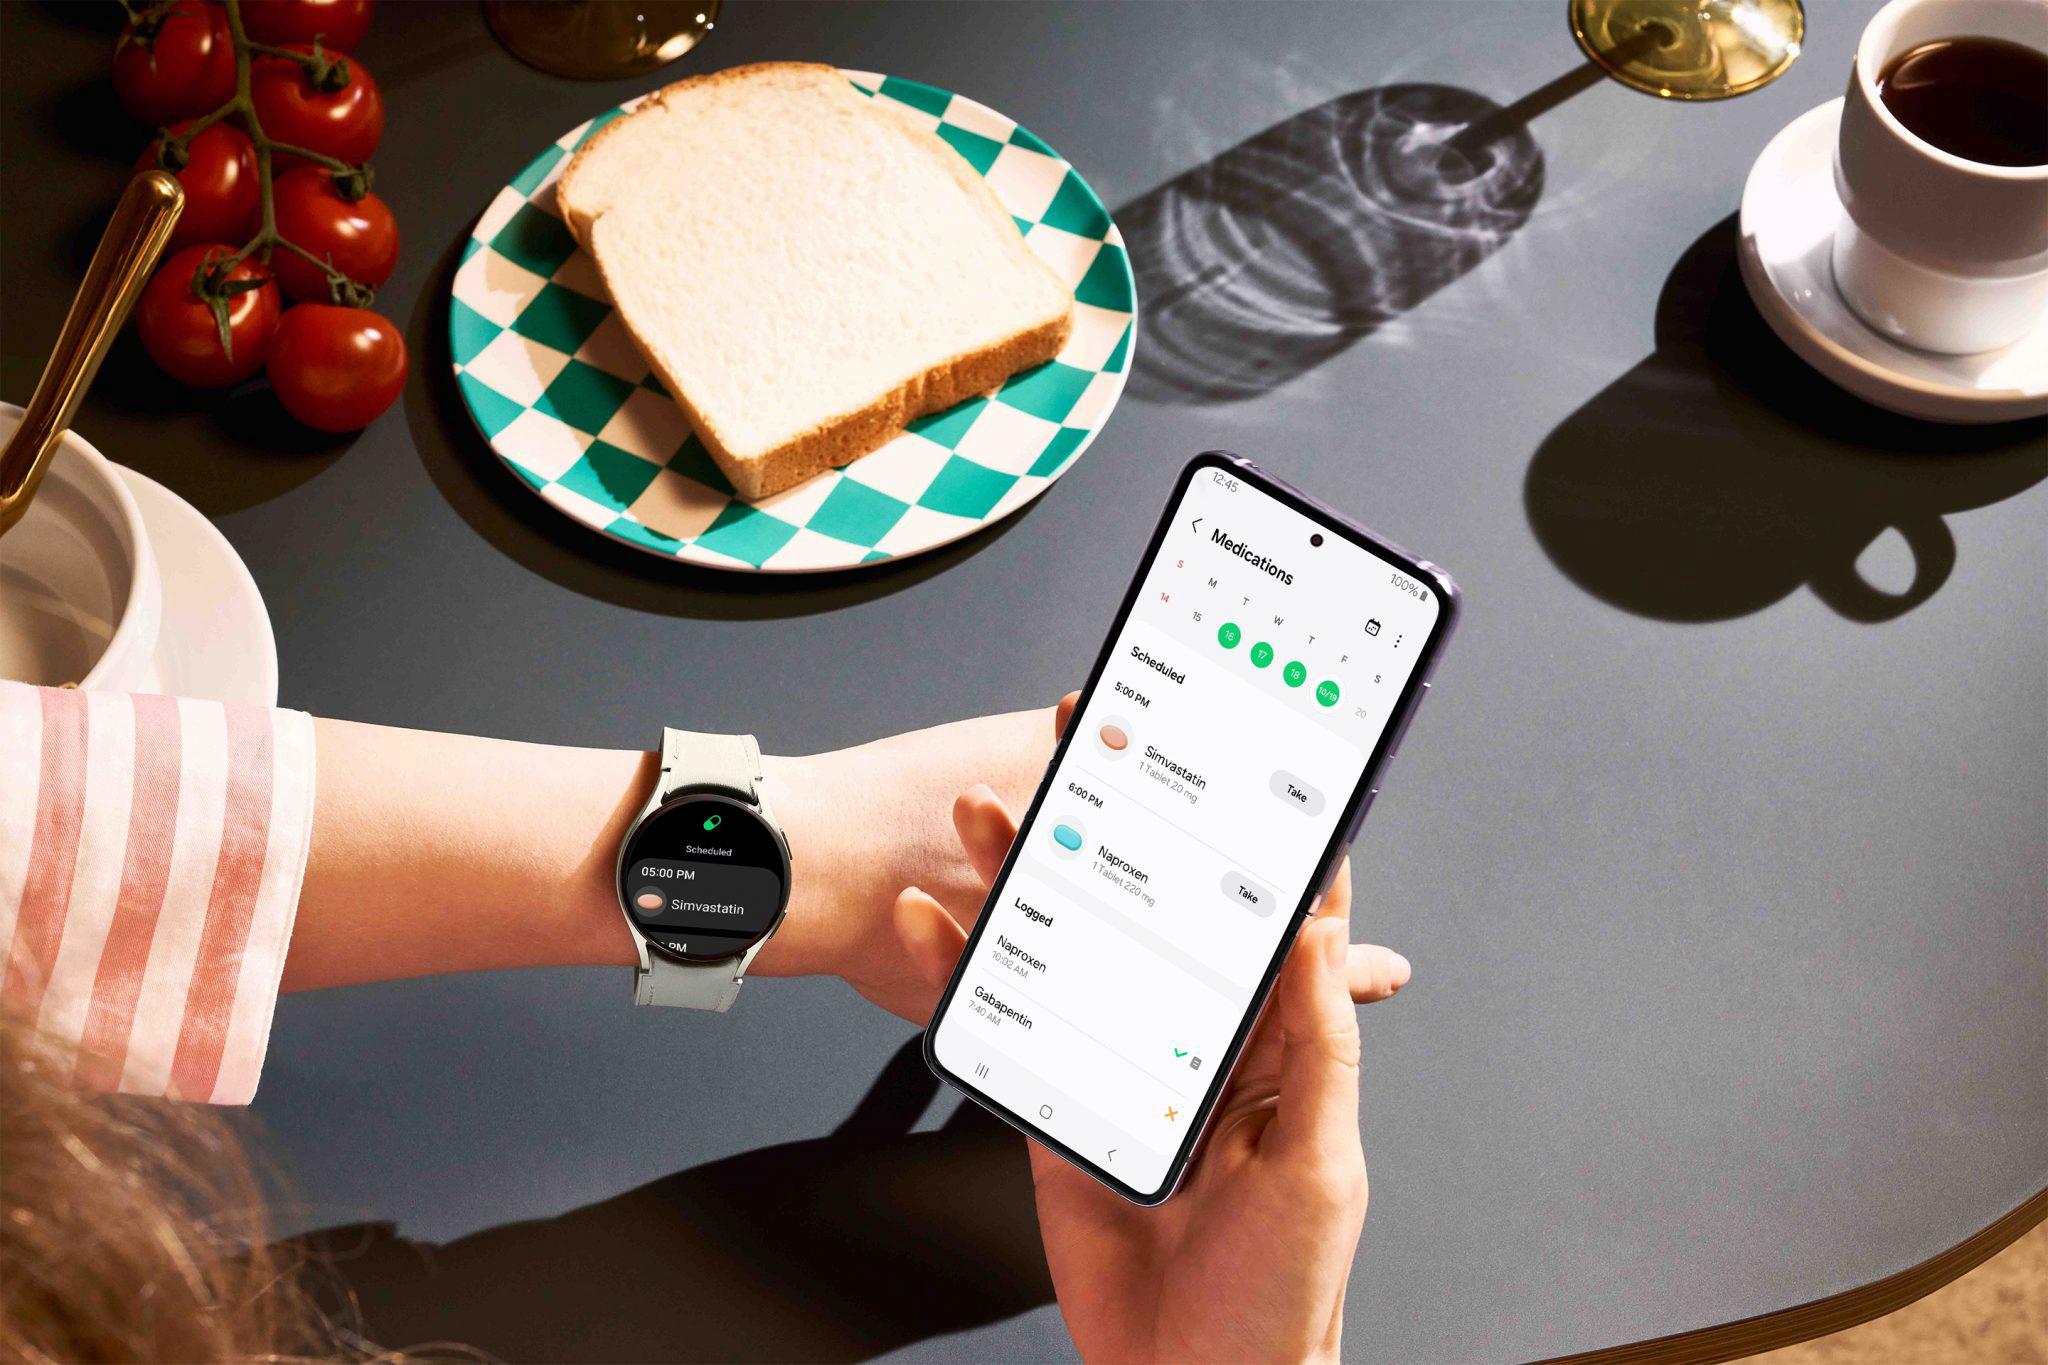 Samsung Announces New Medications Tracking Feature for Samsung Health